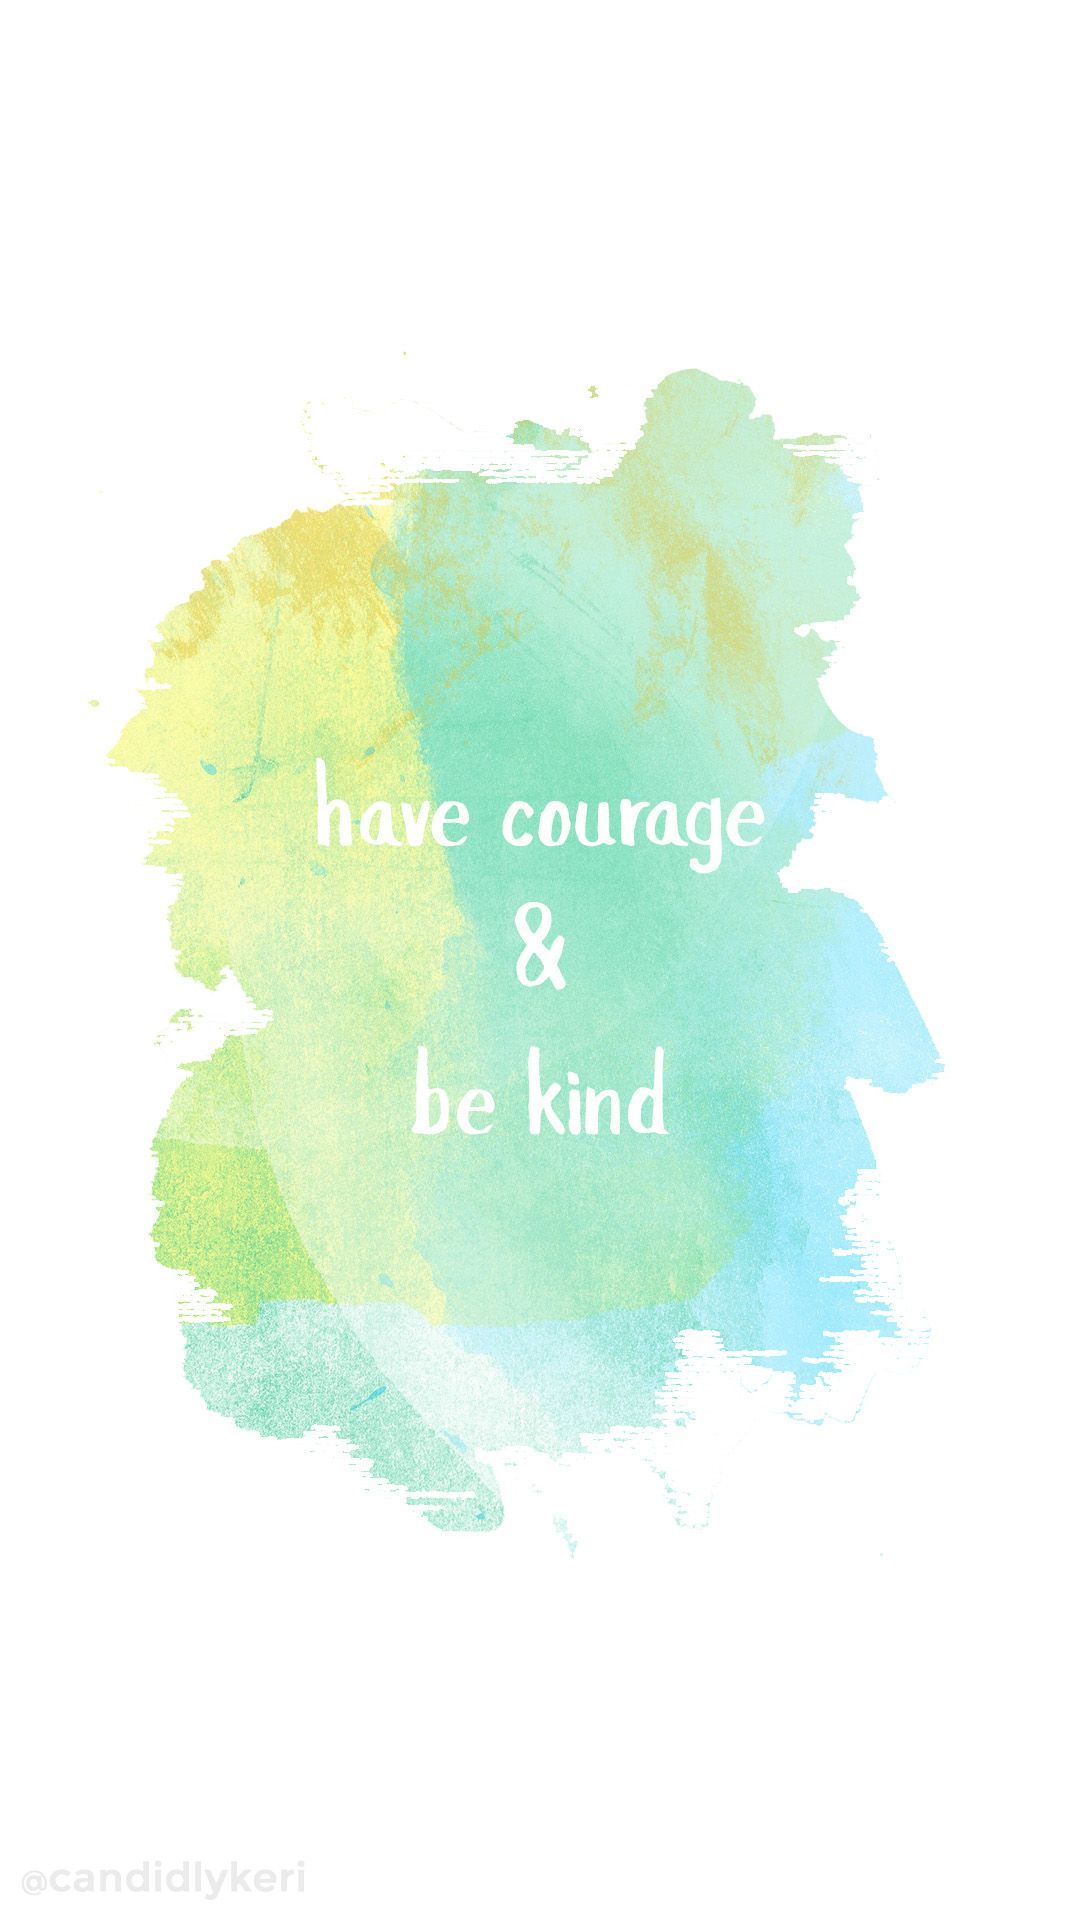 Have courage and be kind blue and yellow watercolor quote